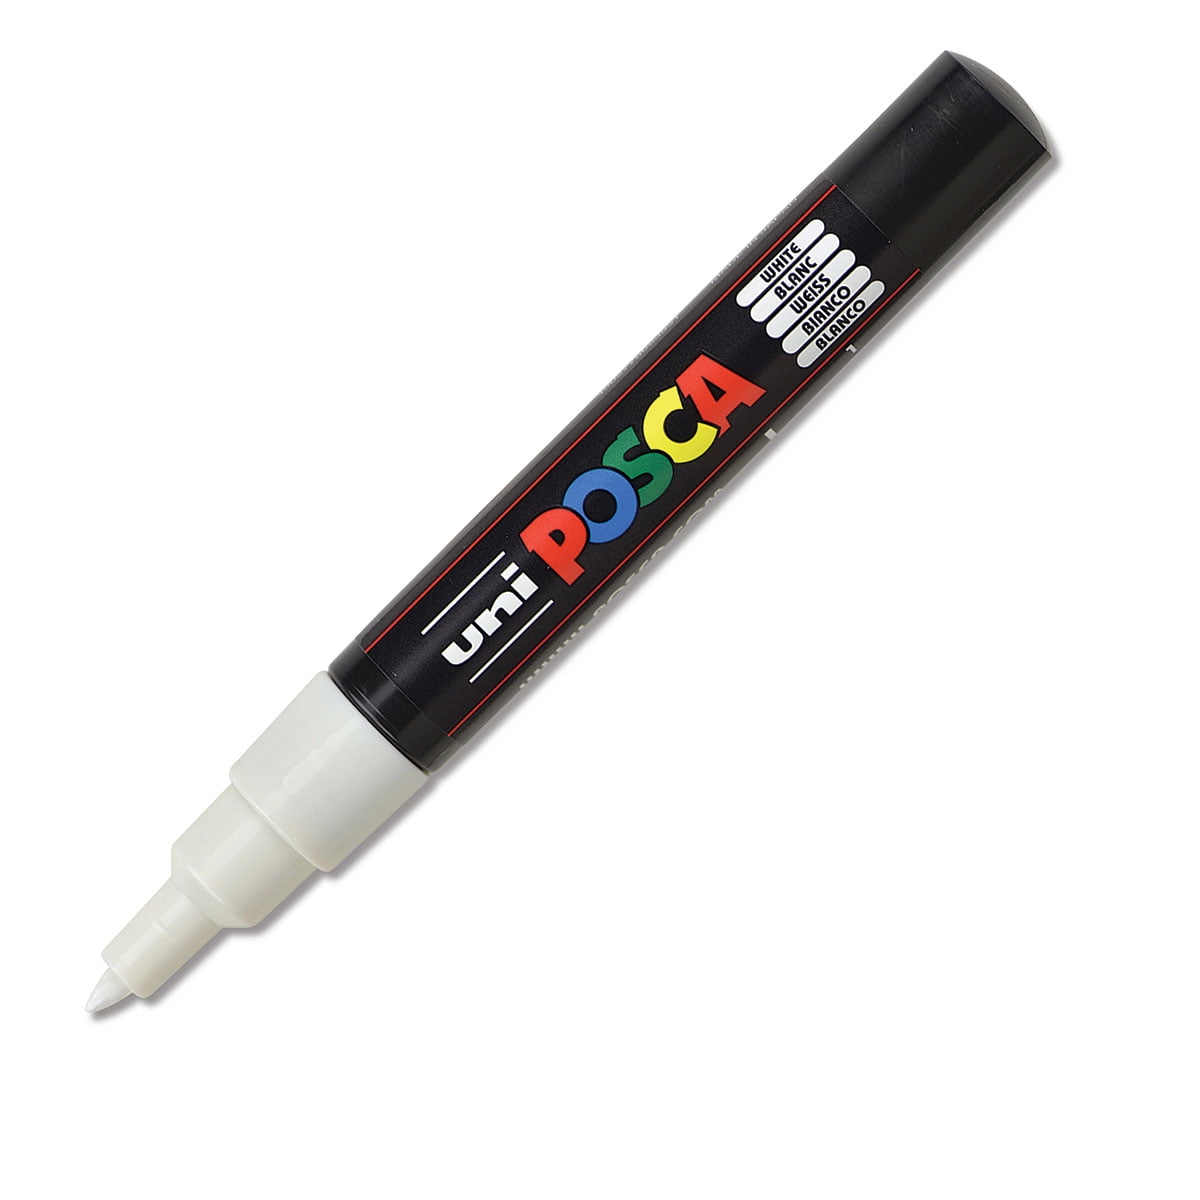 12 Posca Paint Markers, 1M Markers with Extra Fine Tips, Posca Marker Set  of